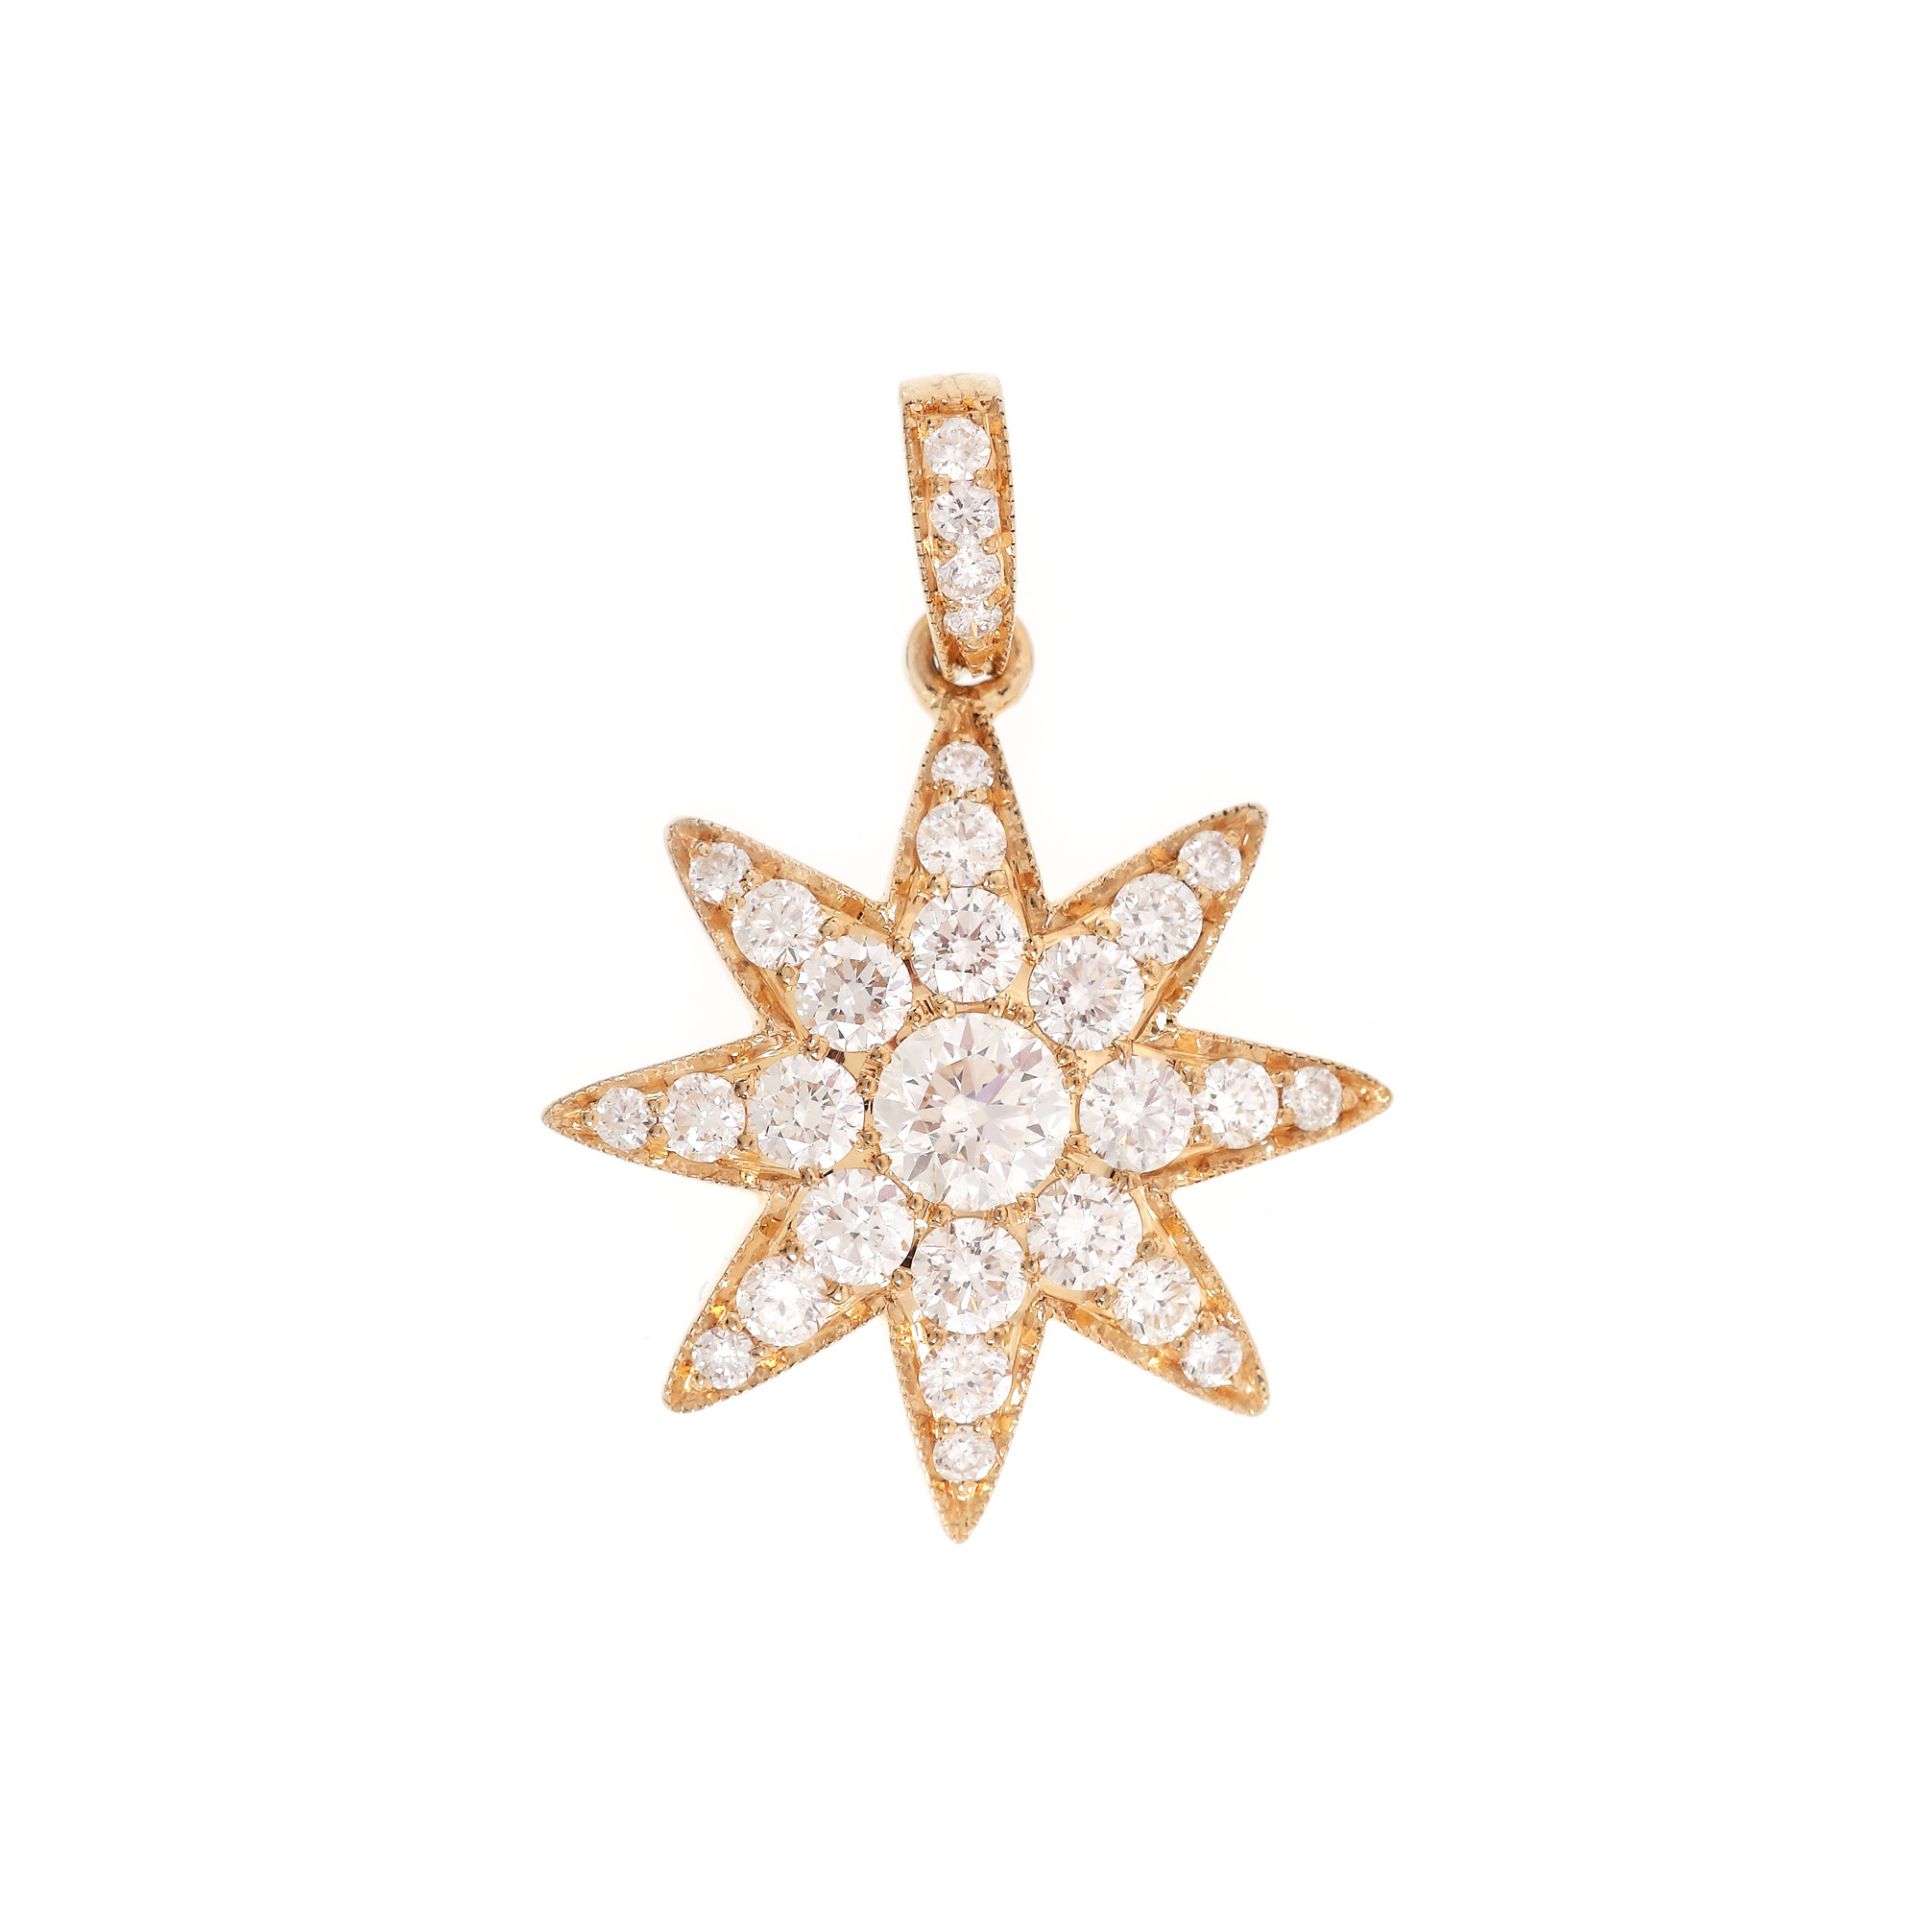 "Royal Star" - Luke Stockley pendant, gold, decorated with diamonds